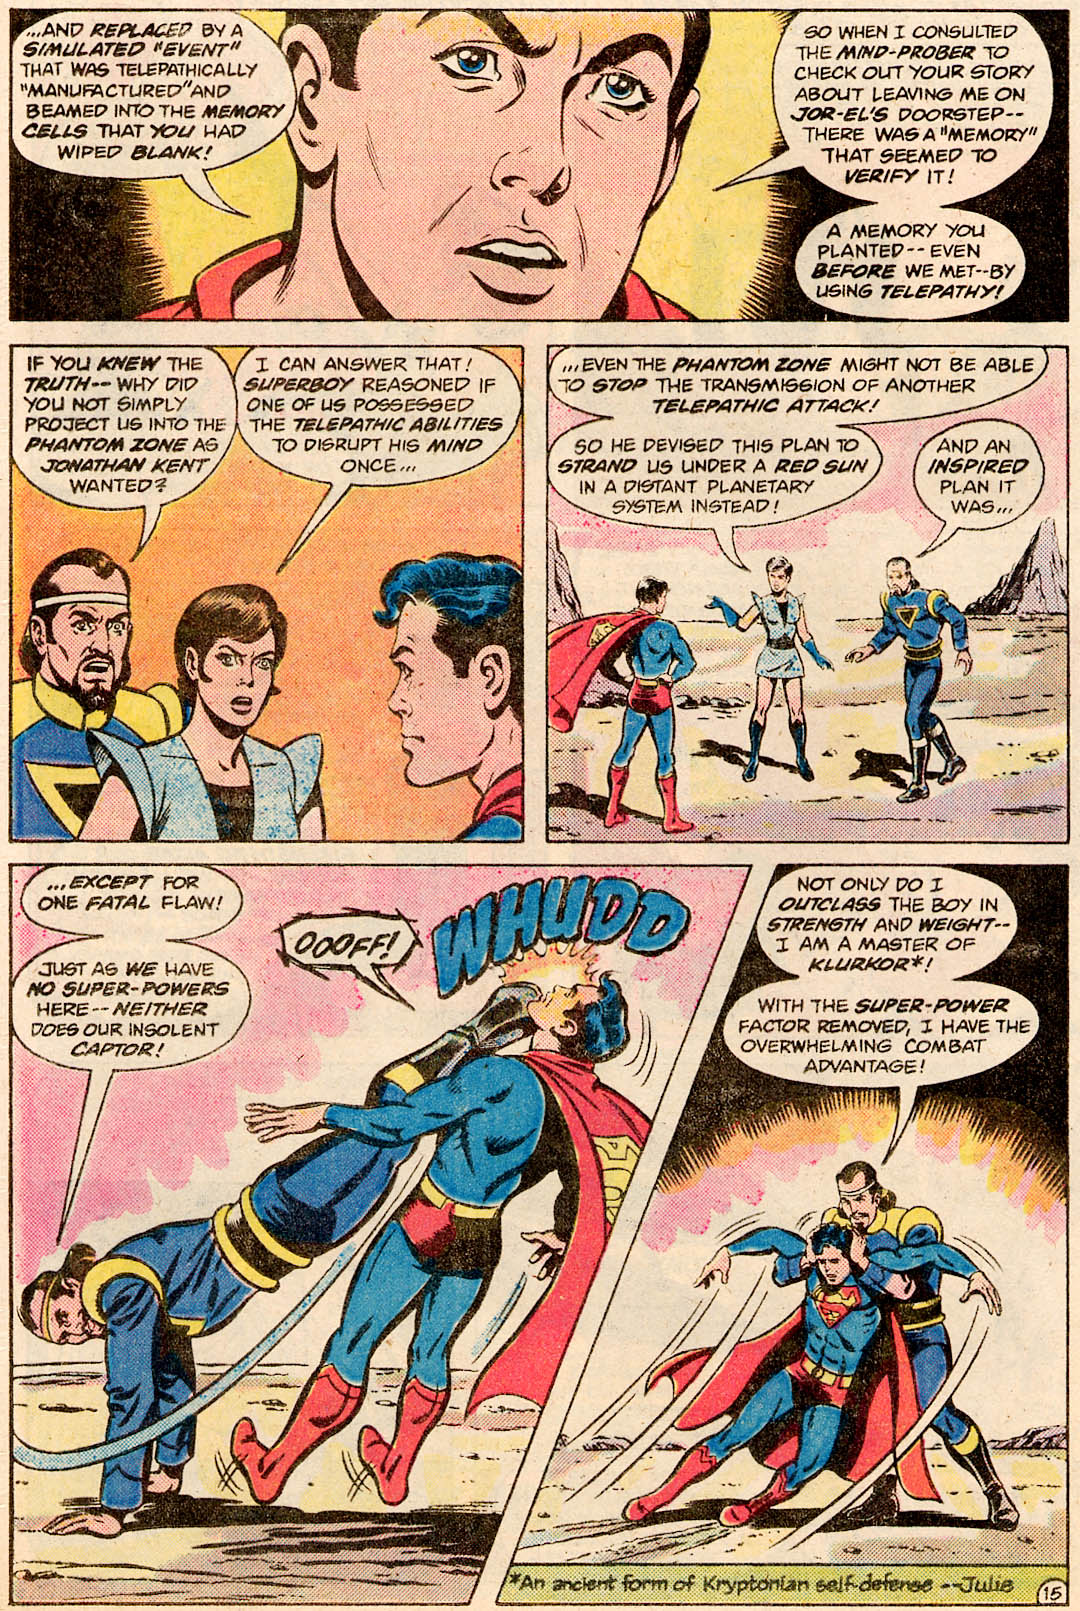 The New Adventures of Superboy 28 Page 15